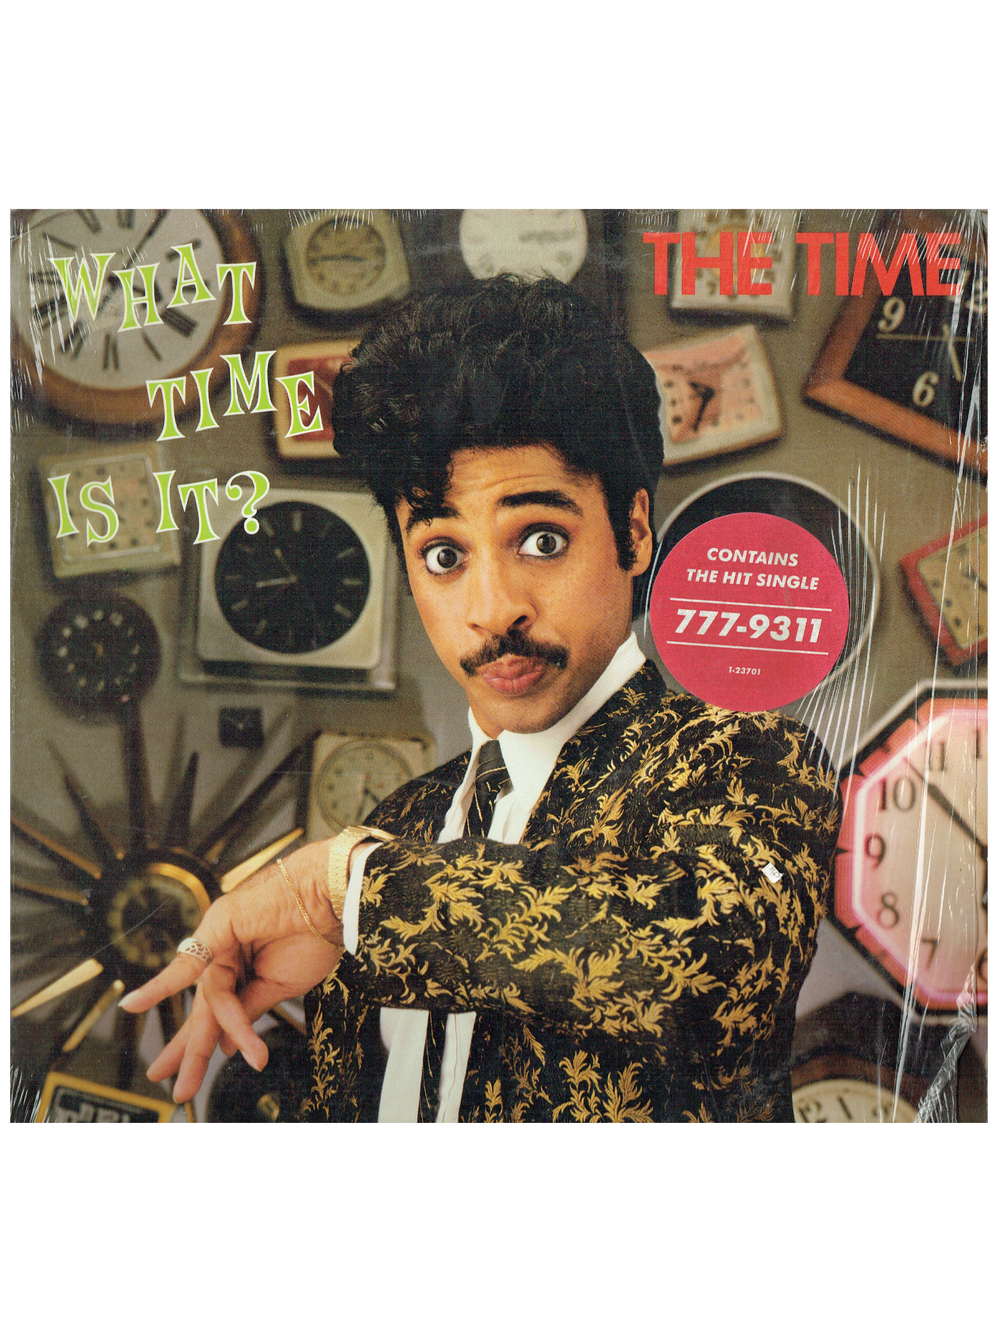 Prince – The Time What Time Is It? USA Vinyl Album Original Release 1982 Prince WITH HYPE